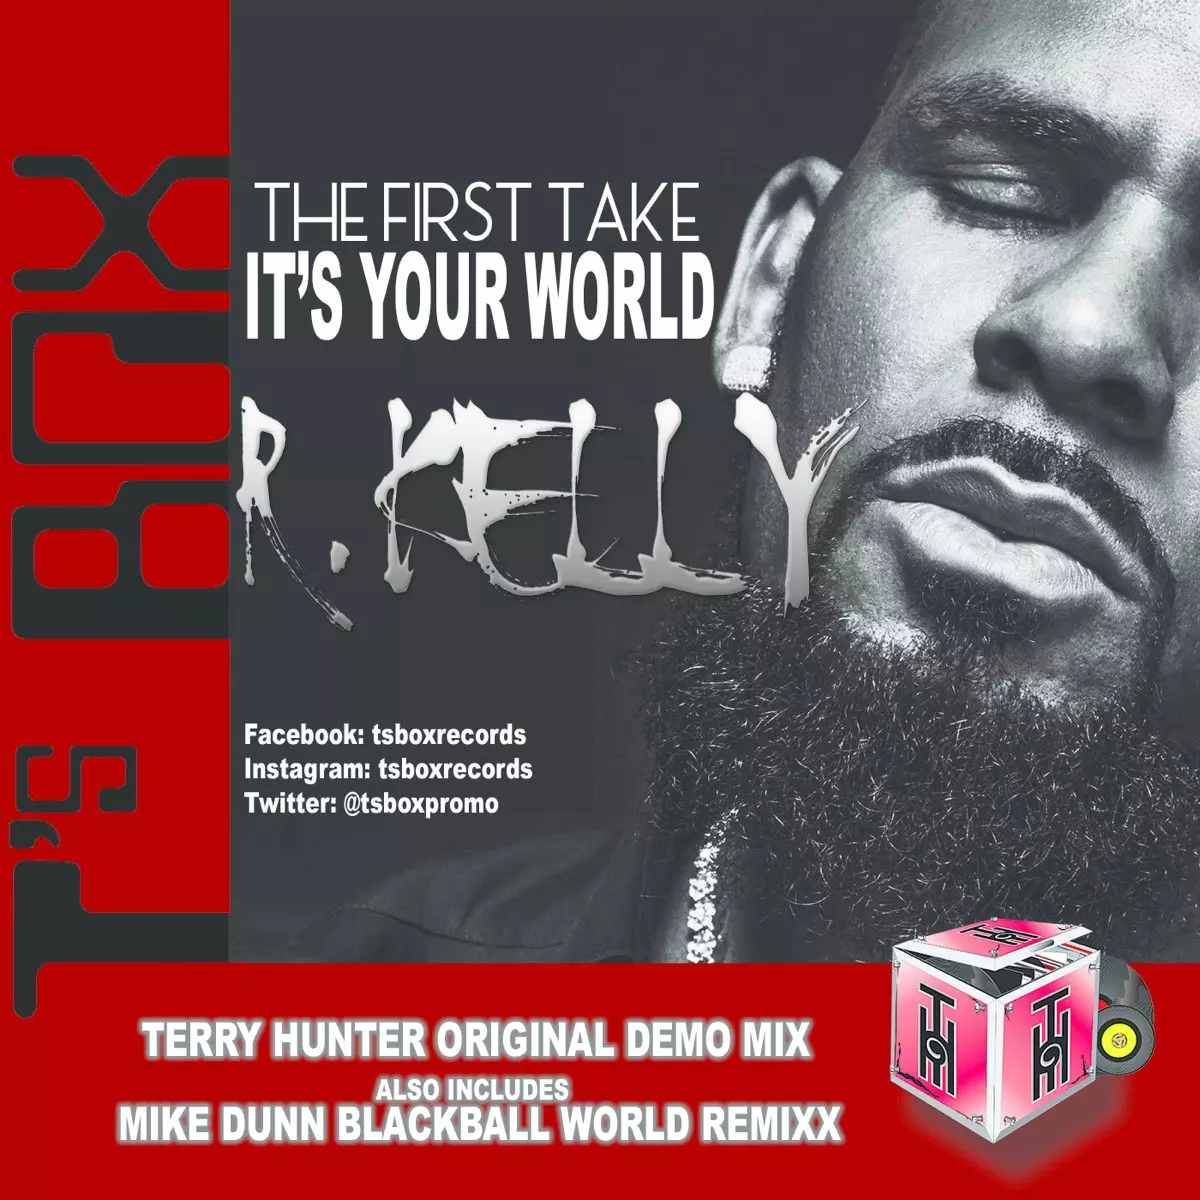 It's Your World (The First Take) - EP by R. Kelly on Apple Music